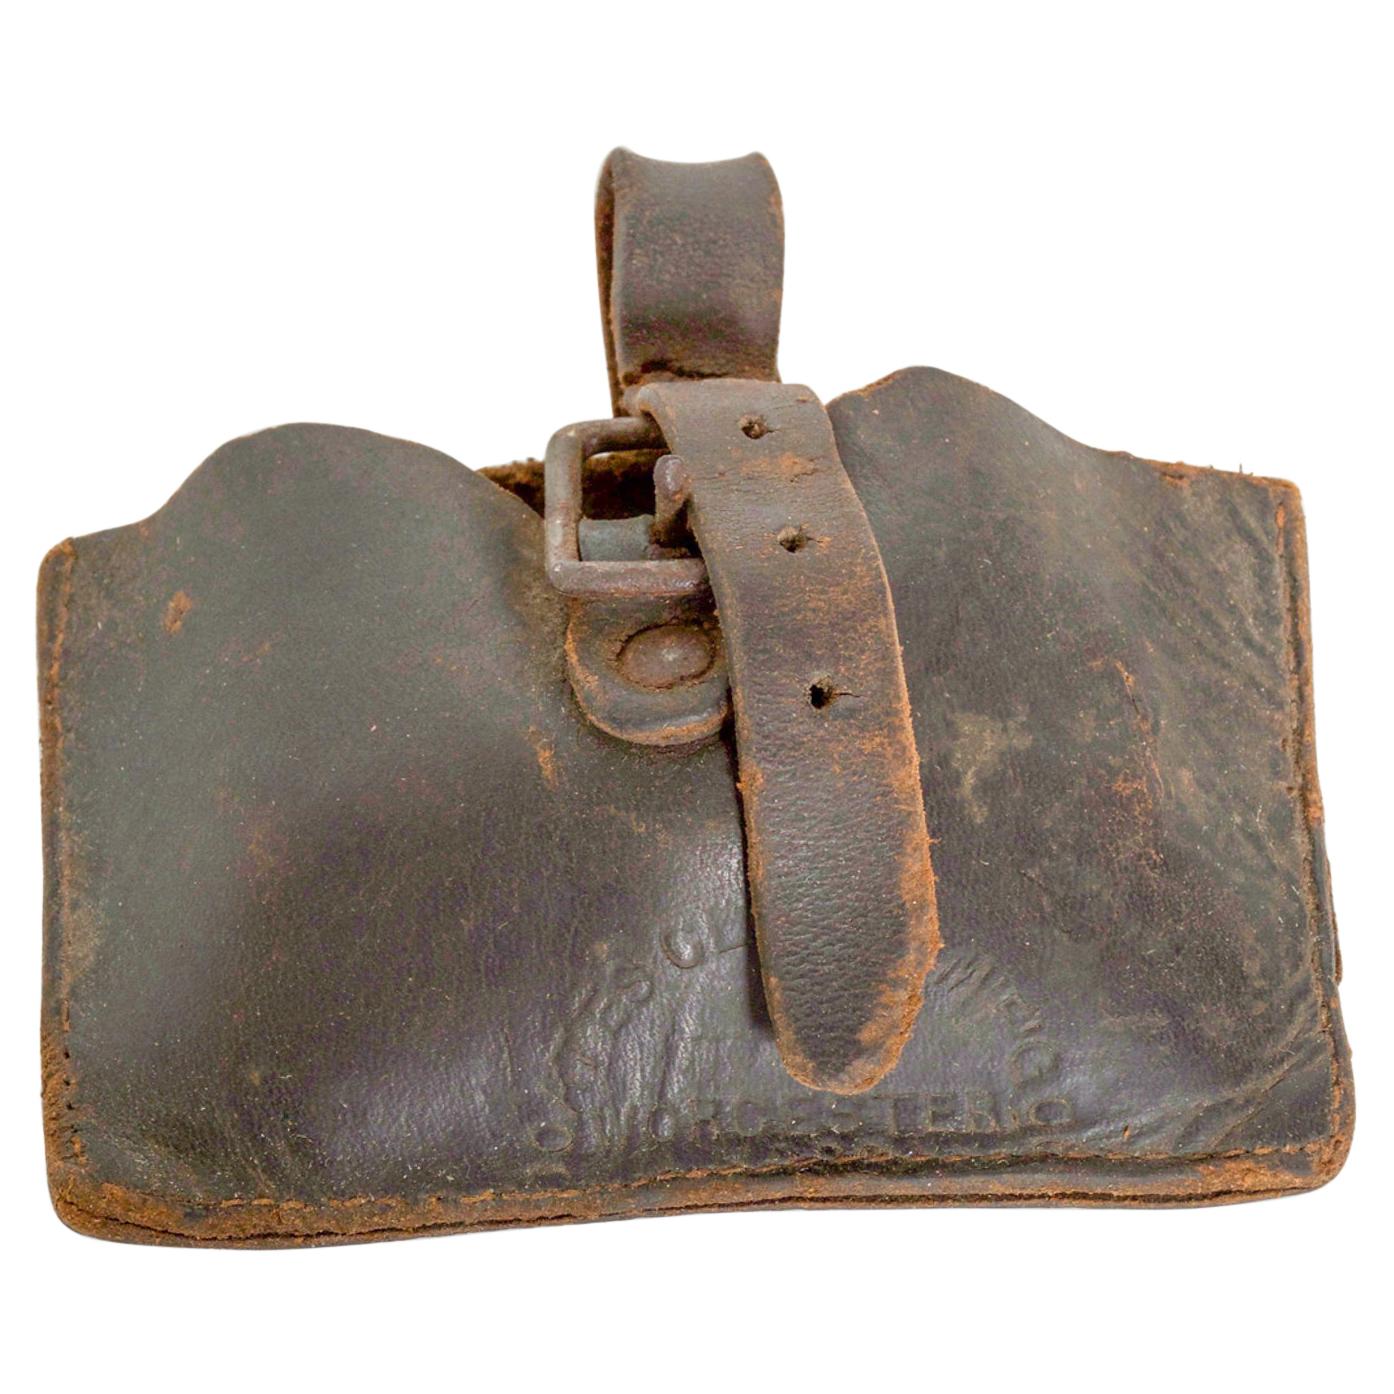 Antique Distressed Leather Money Pouch Belt Coin Wallet 1900s